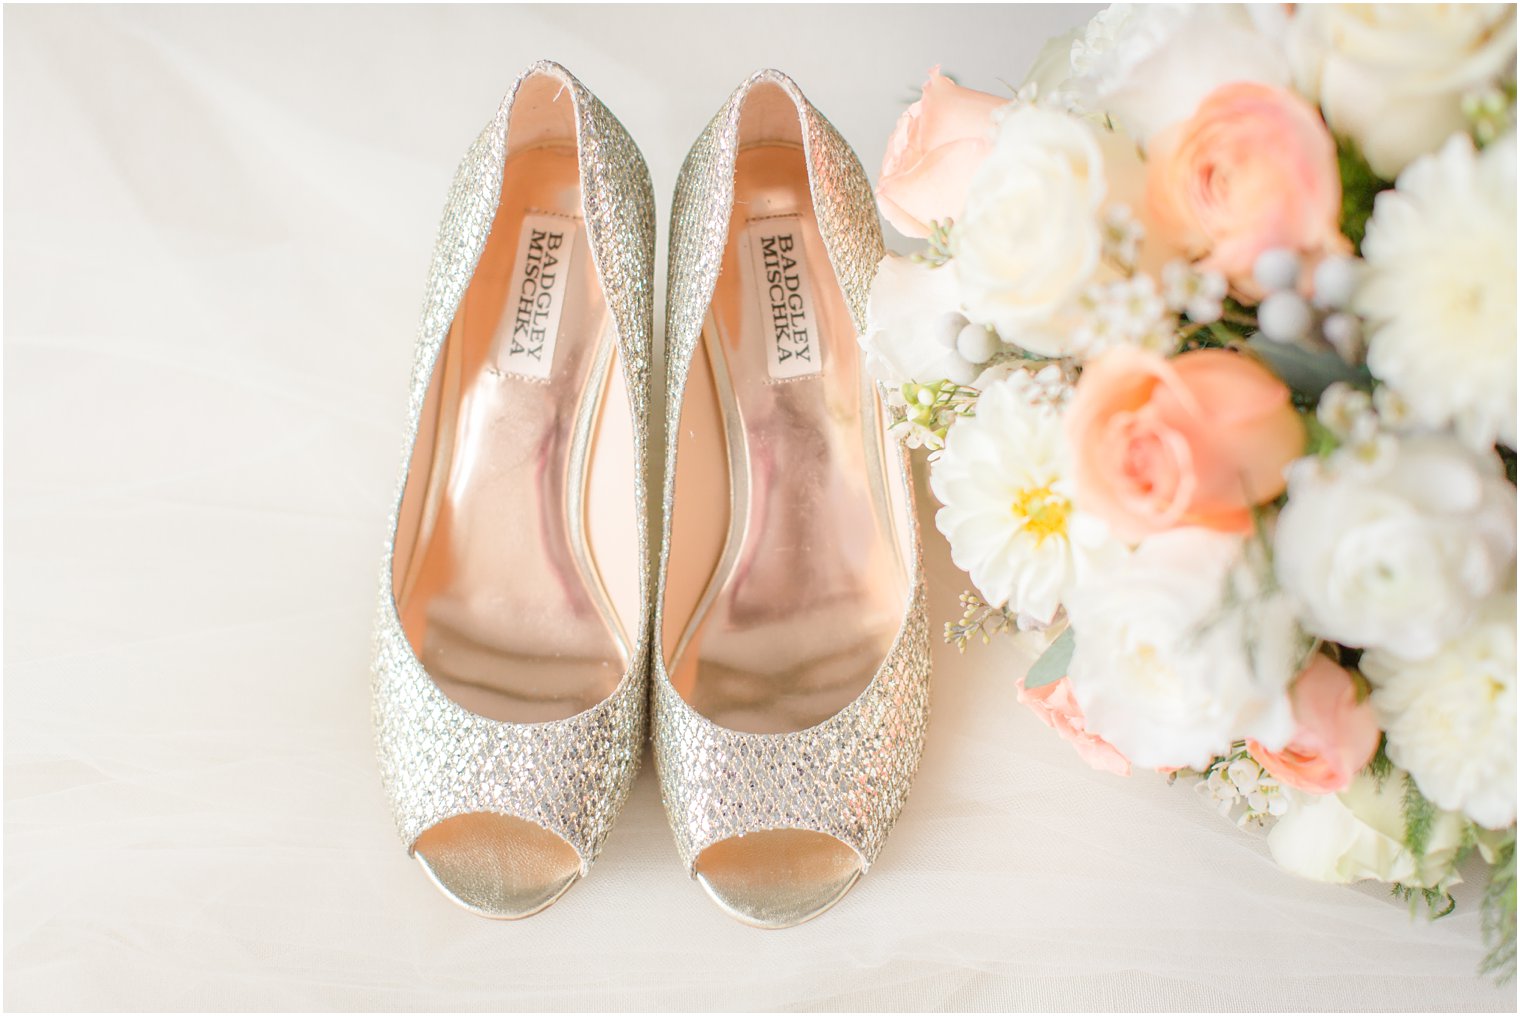 sparkly Badgley Mischka shoes for Lake Mohawk Country Club wedding day photographed by Idalia Photography